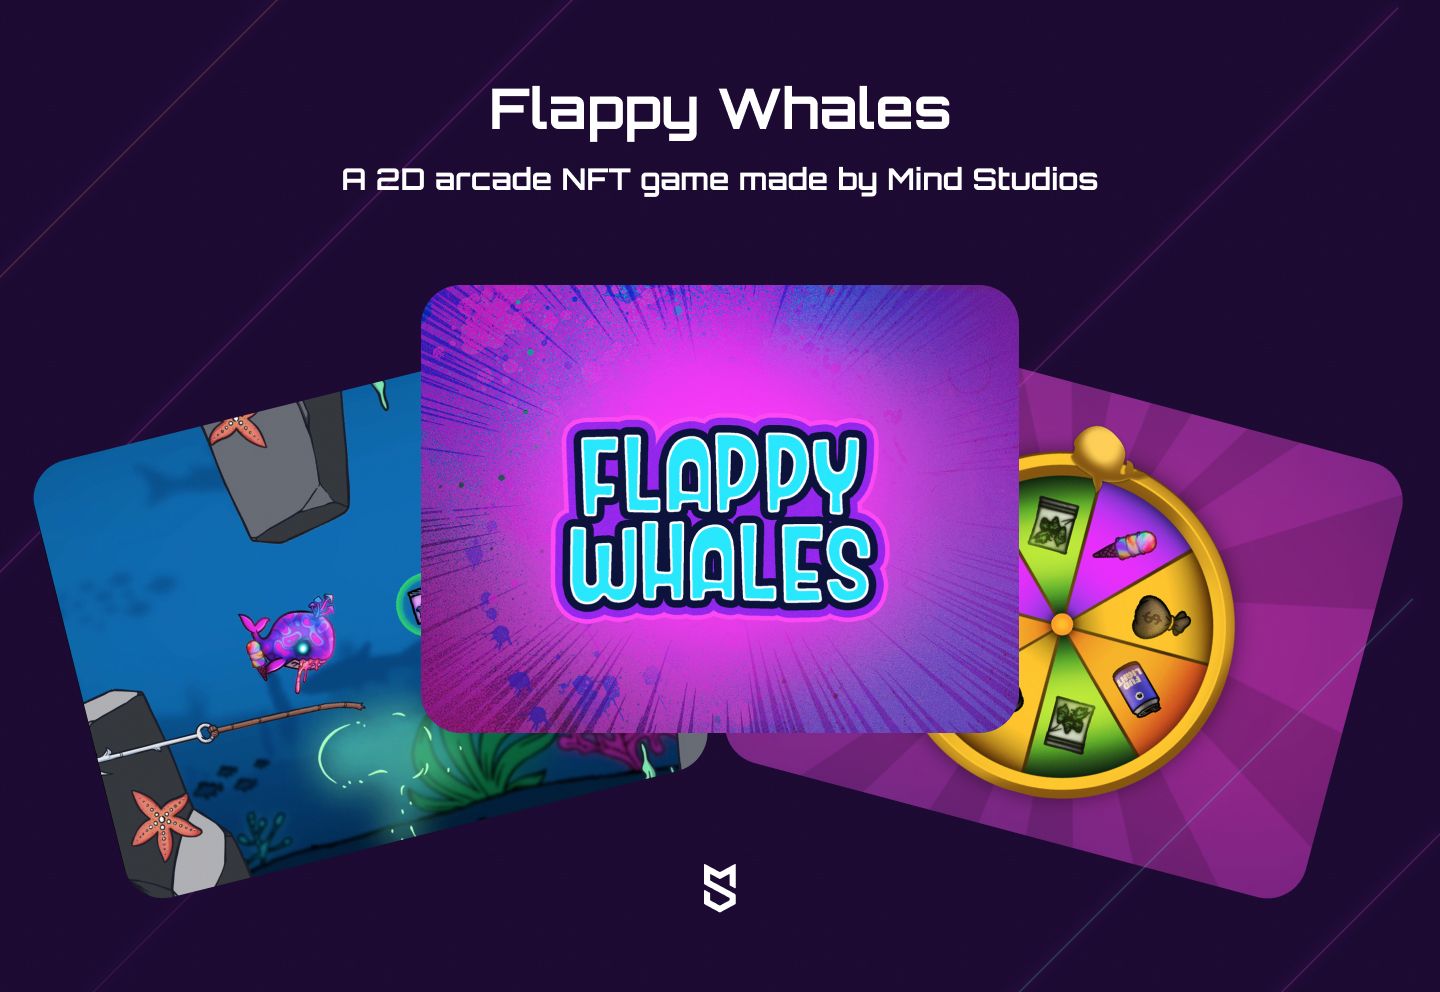 2D arcade NFT game Flappy Whales made by Mind Studios